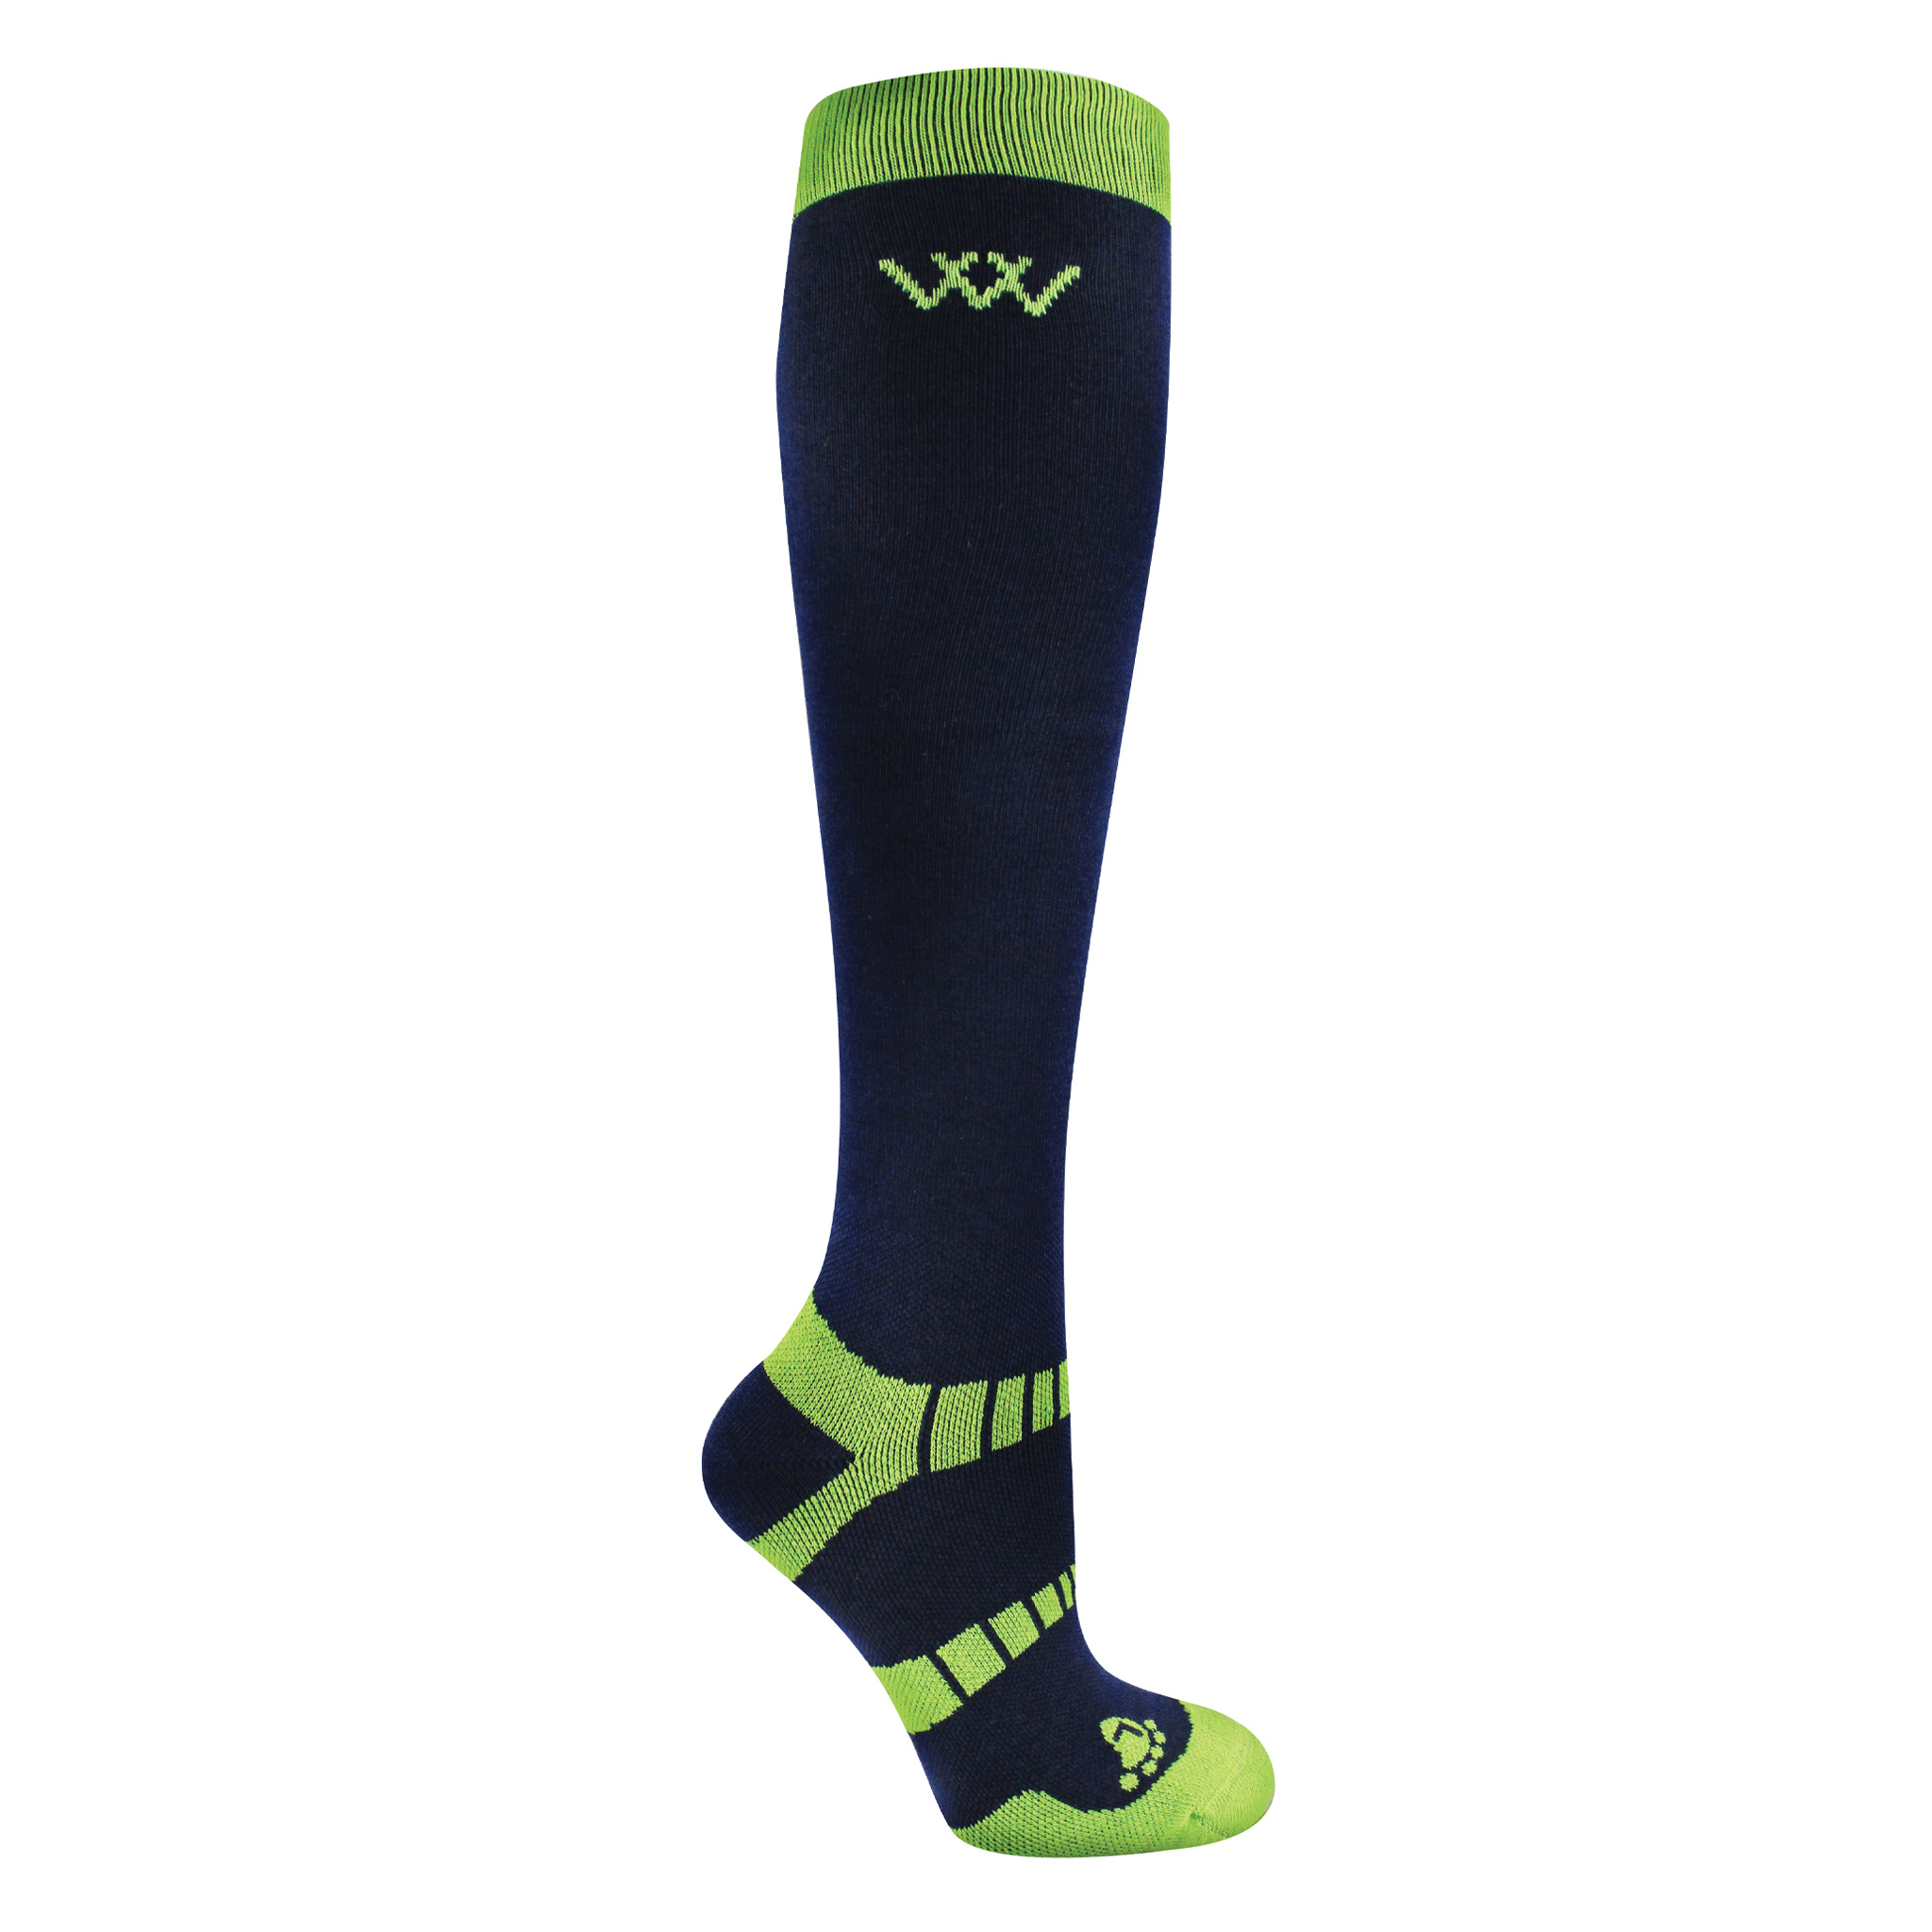 Woof Wear Winter Riding Socks 2 Pack in Navy and Green WW0015